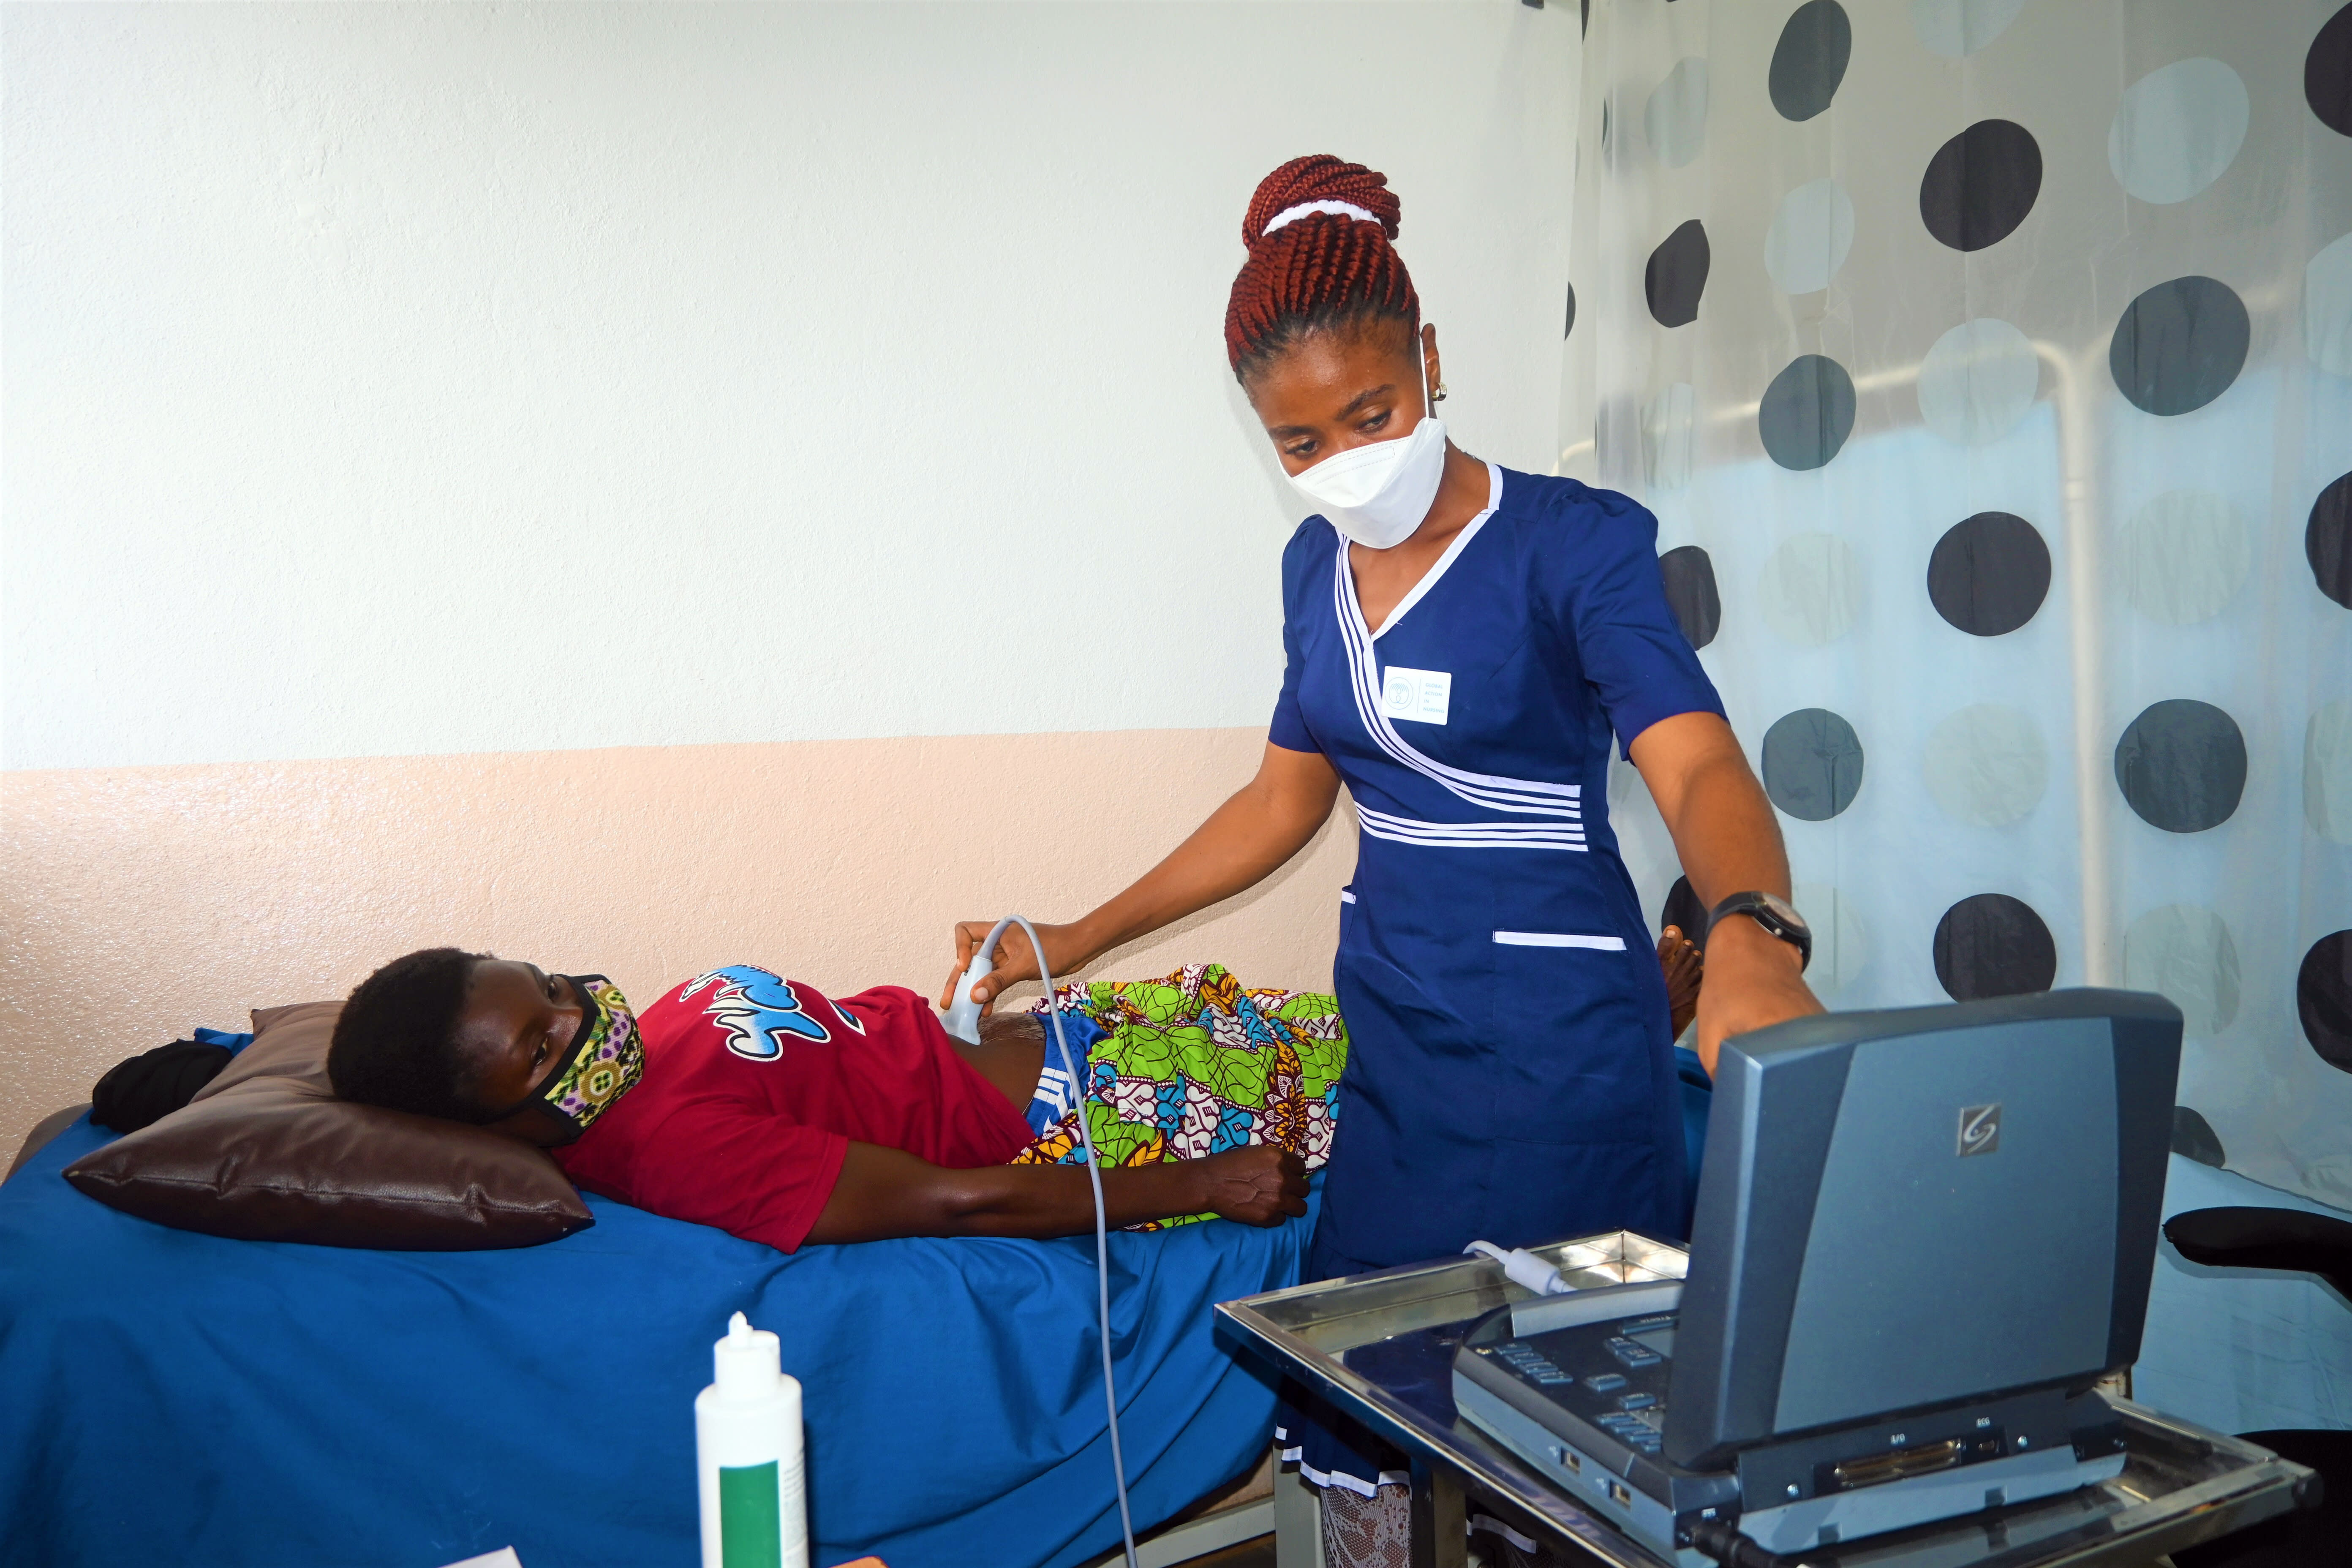 A GAIN fellow (Global Action In Nursing Fellowship) performs an ultrasound on a patient in Liberia